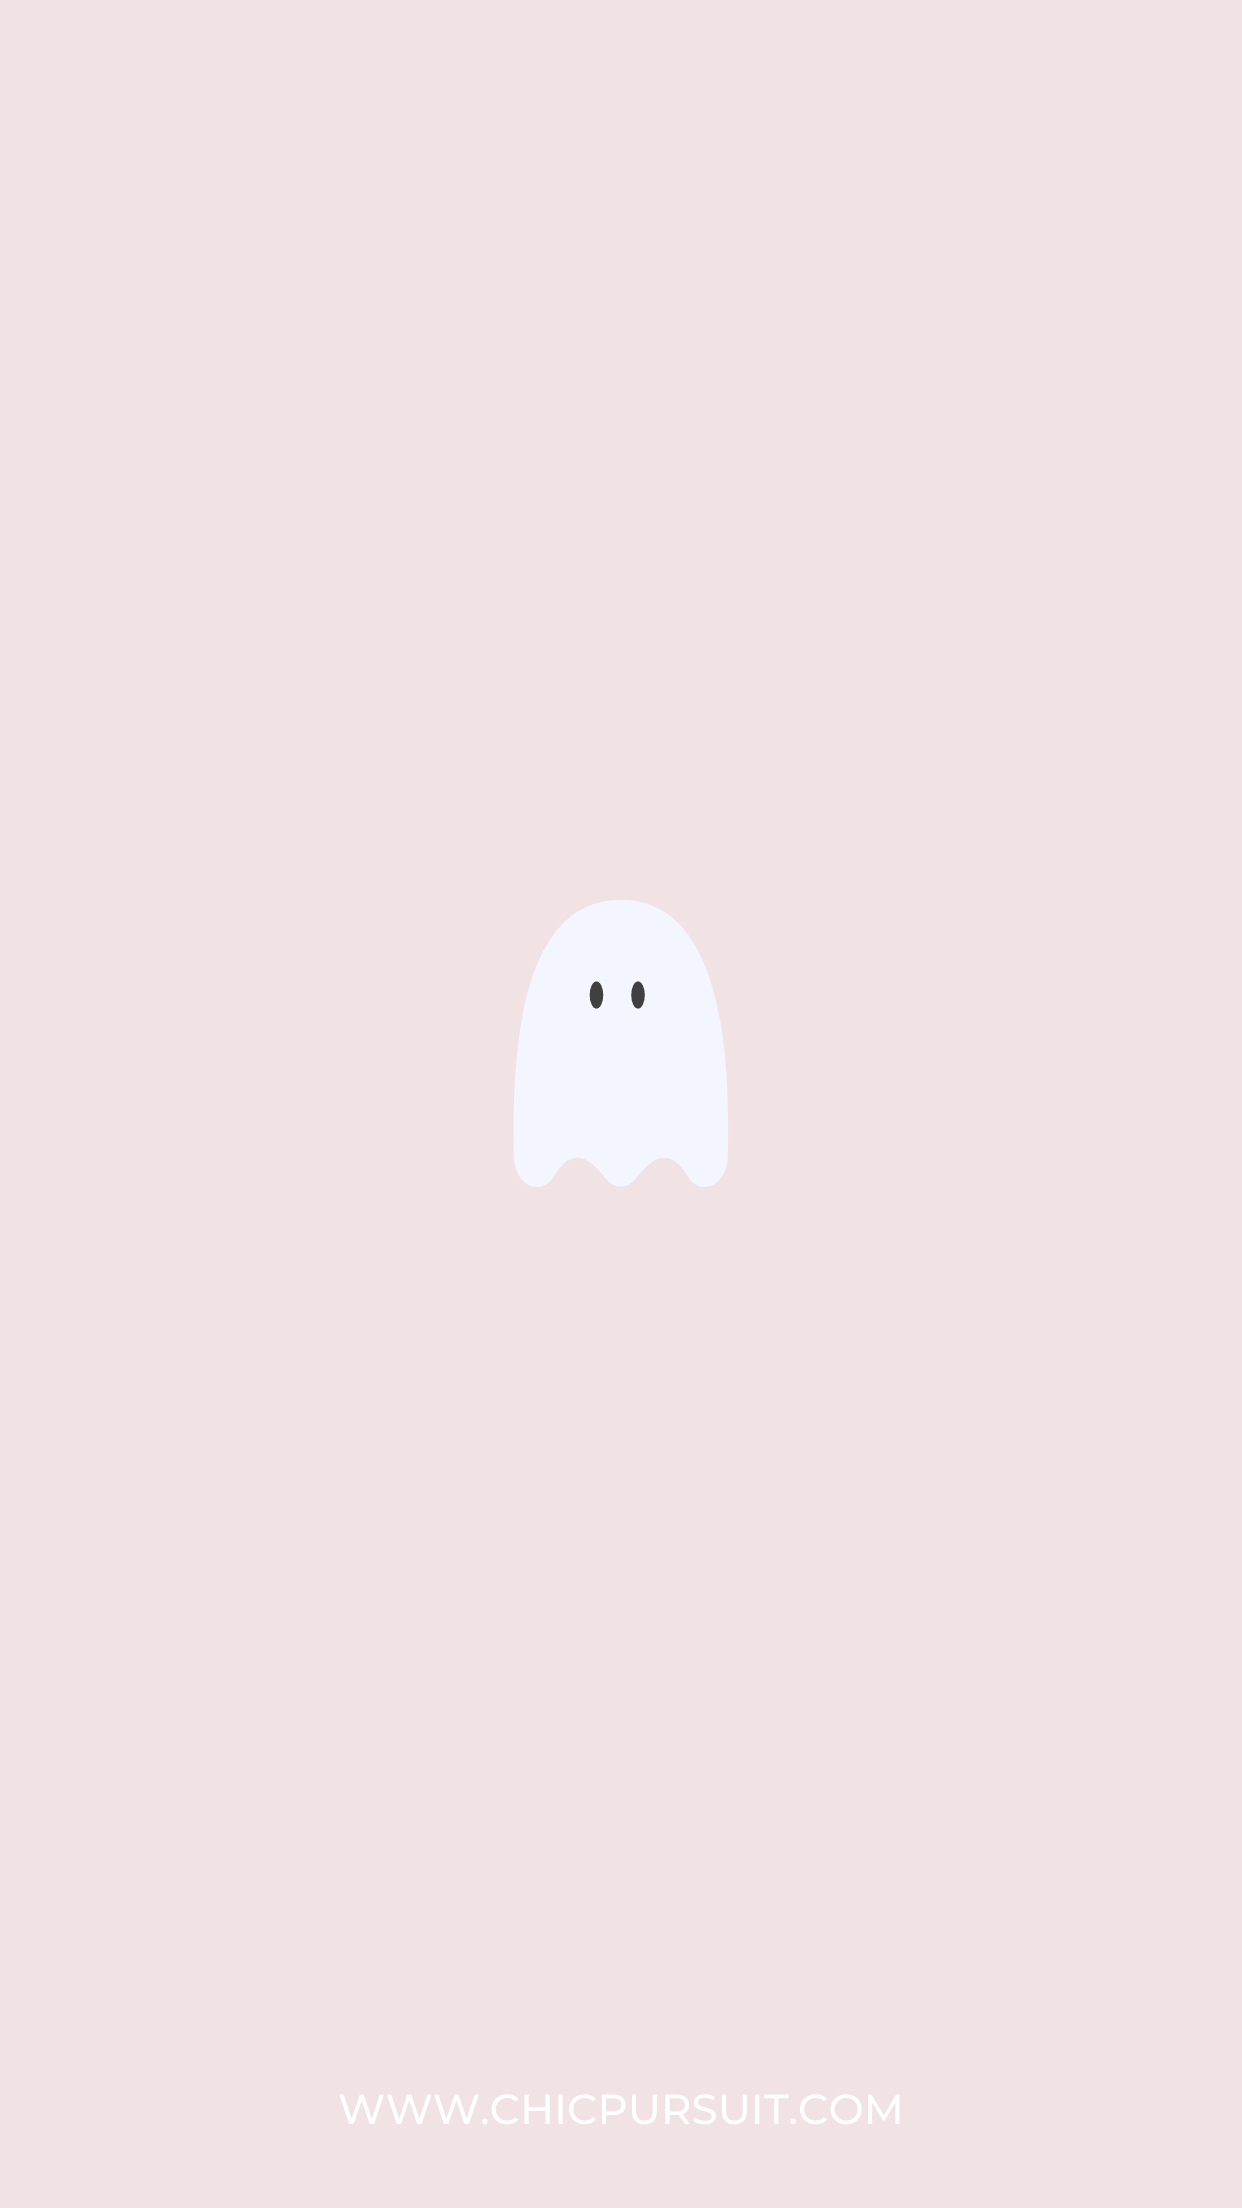 Cute White Iphone Wallpapers